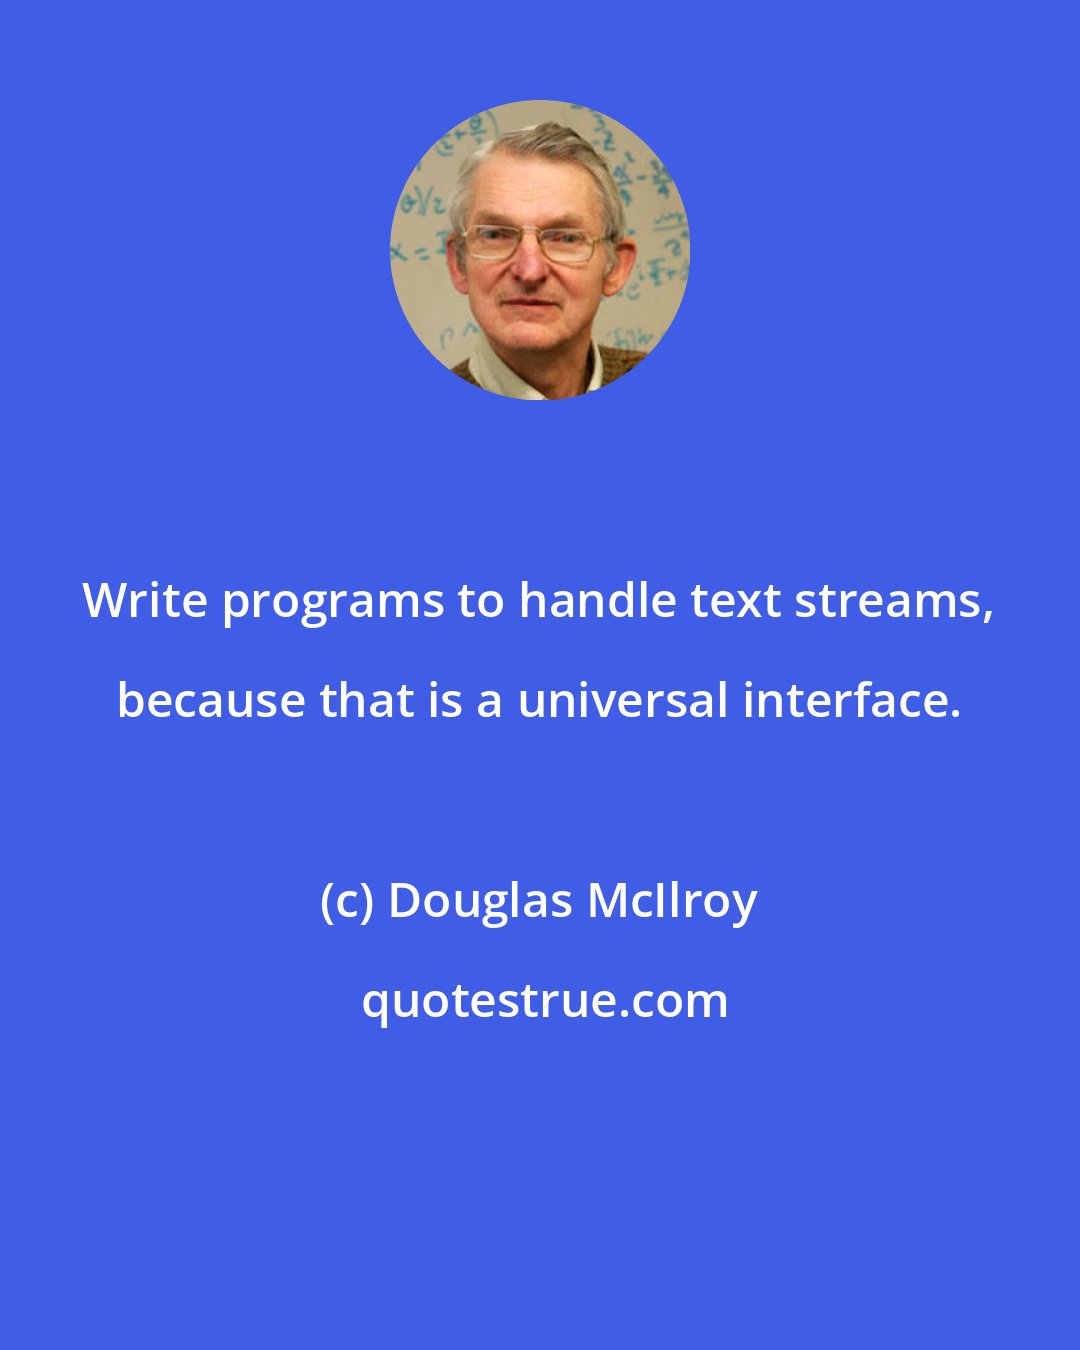 Douglas McIlroy: Write programs to handle text streams, because that is a universal interface.